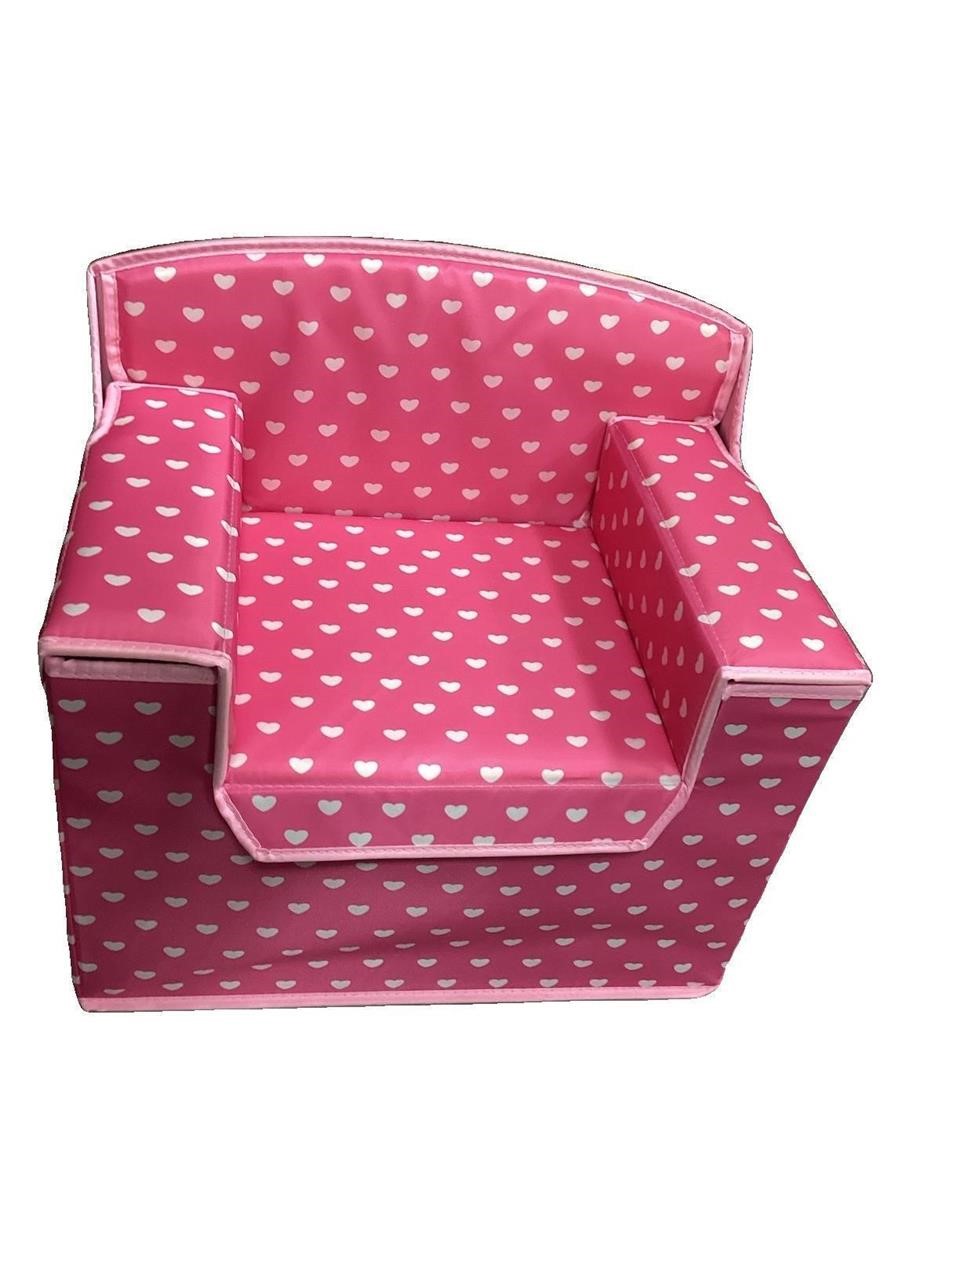 Pink Toddler Chair  heart Print  for Toy Storage